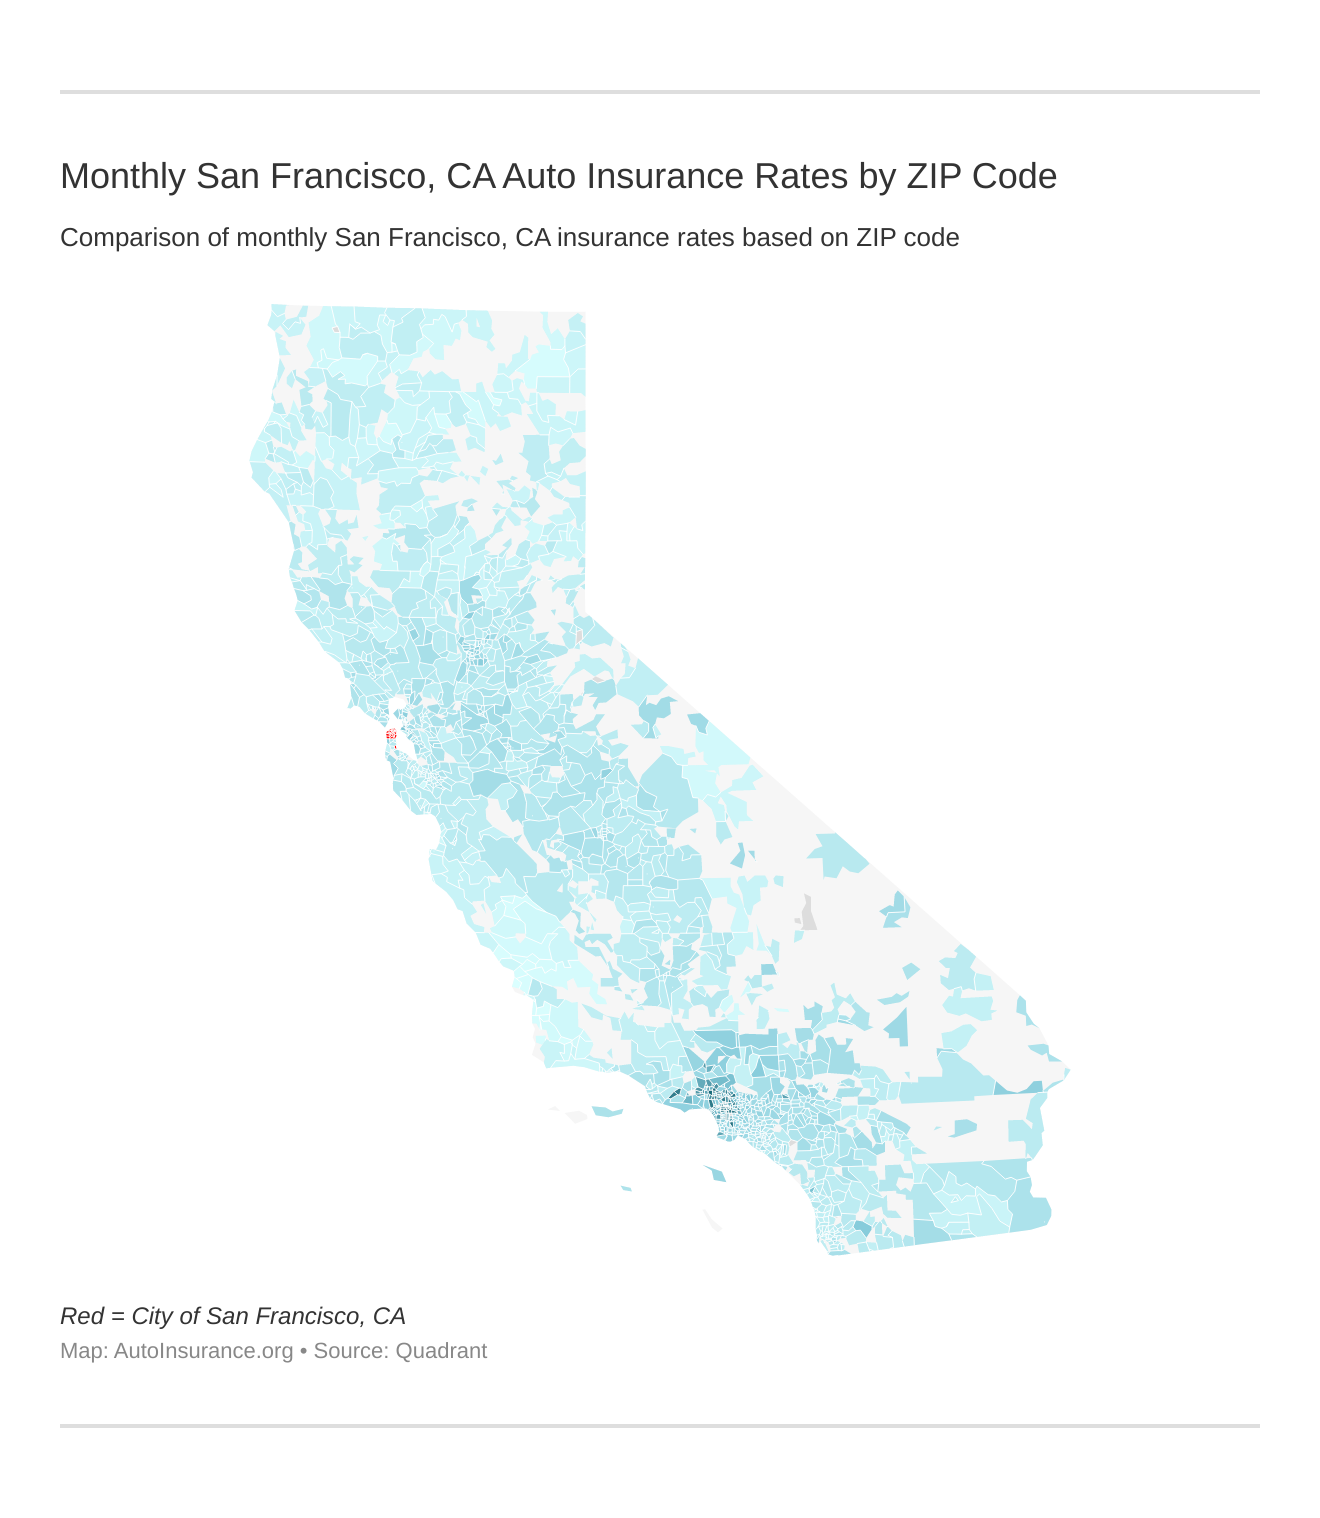 Monthly San Francisco, CA Auto Insurance Rates by ZIP Code